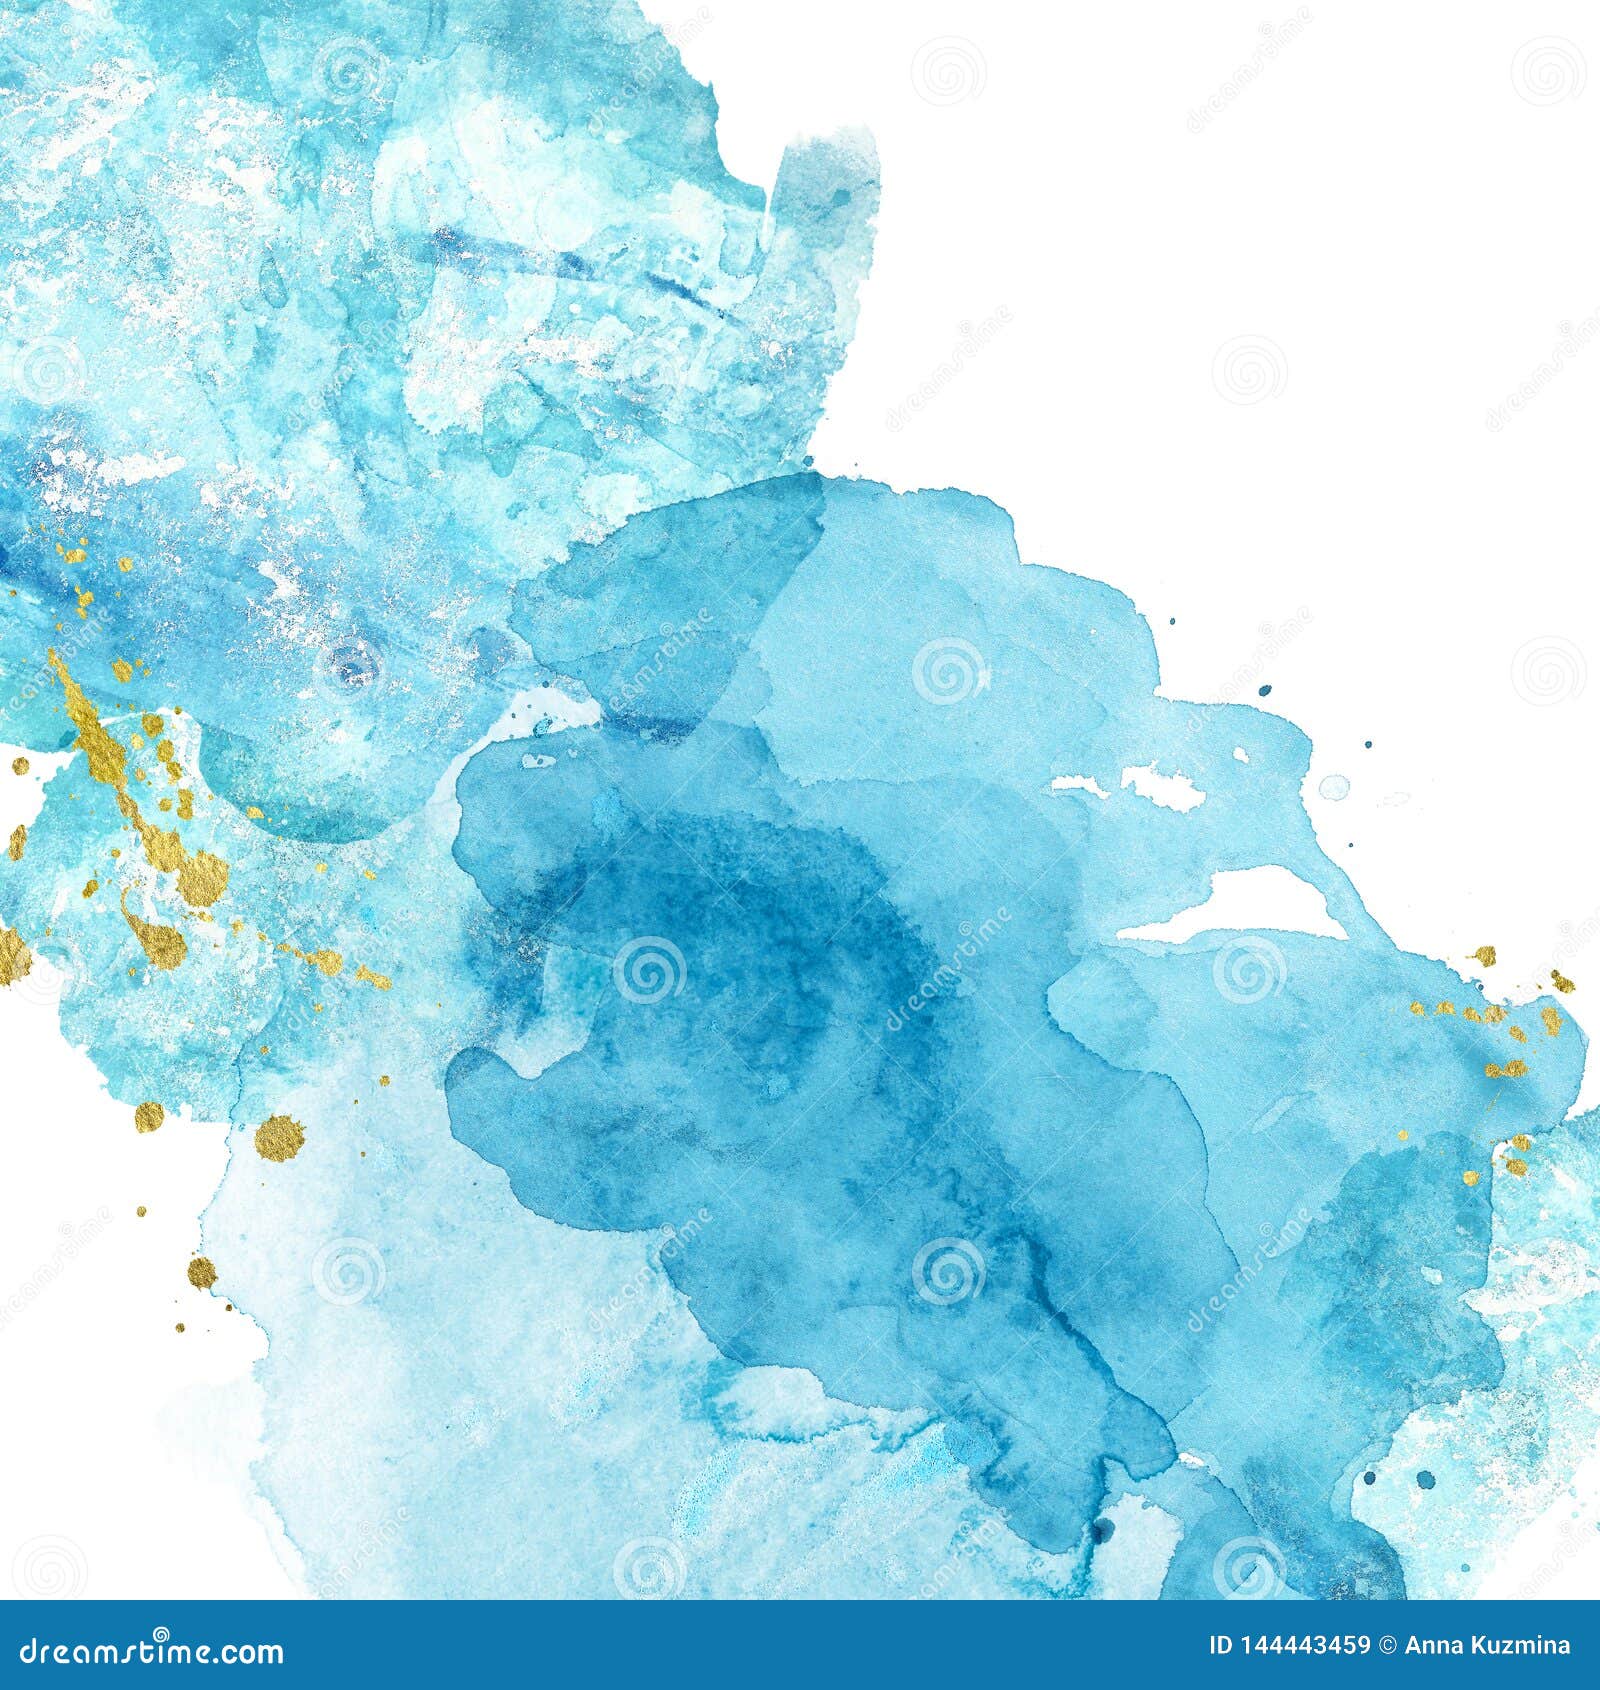 watercolor abstract background with blue and turquoise  splashes of paint on white.  hand painted texture. imitation of sea